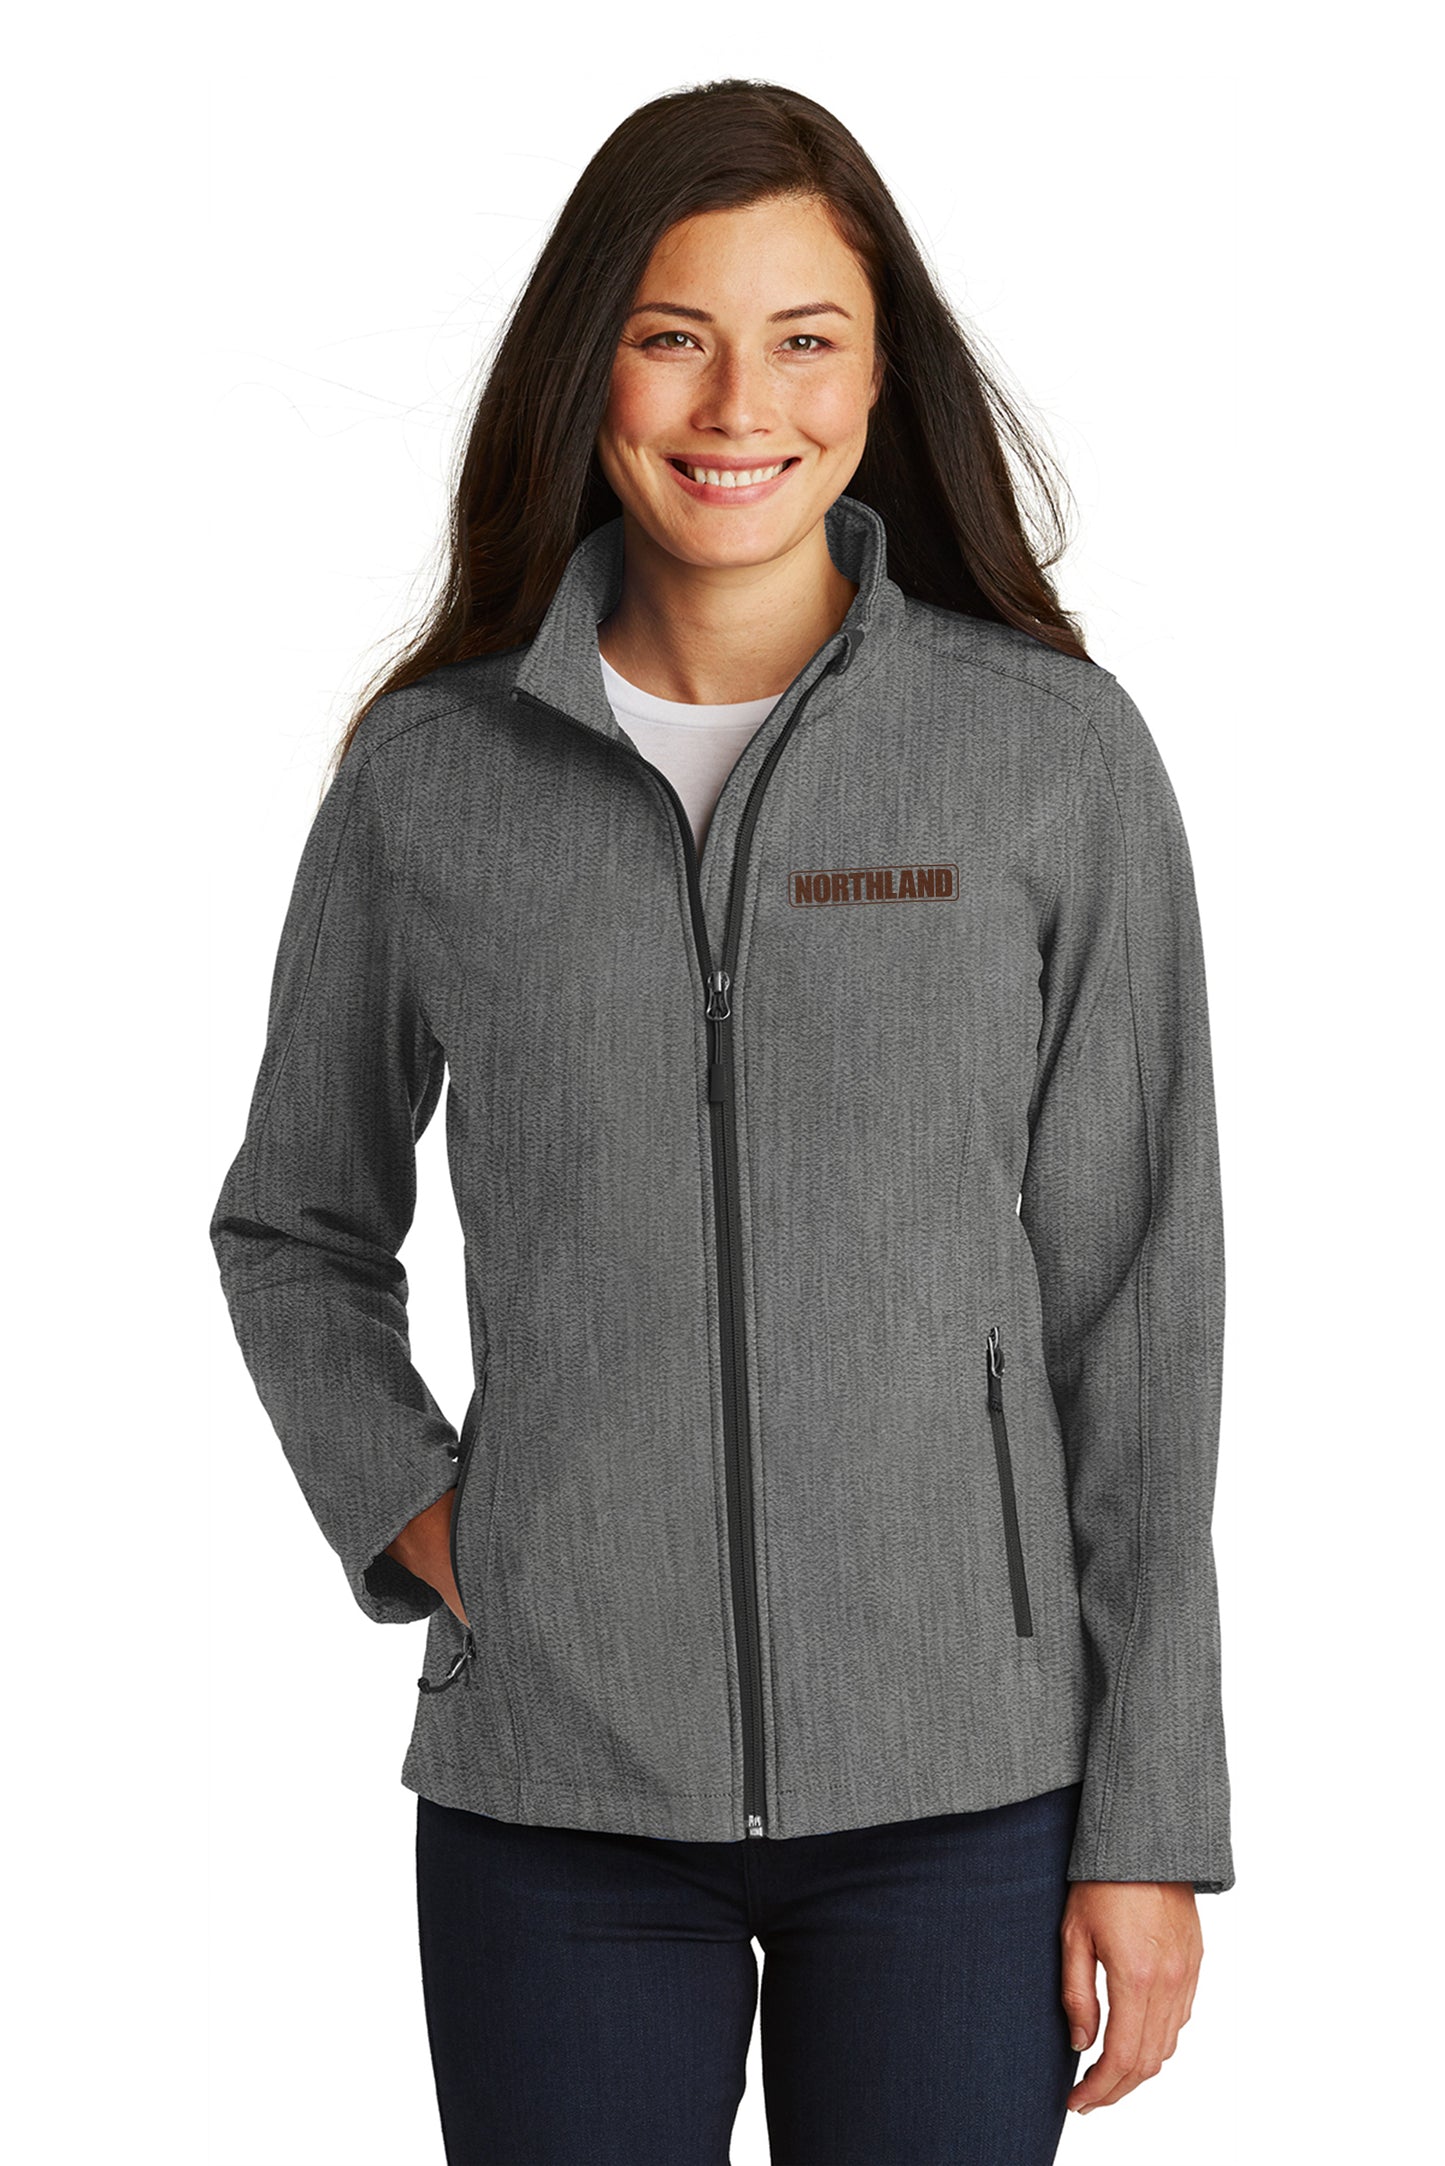 Northland Constructors Ladies Soft Shell Jacket